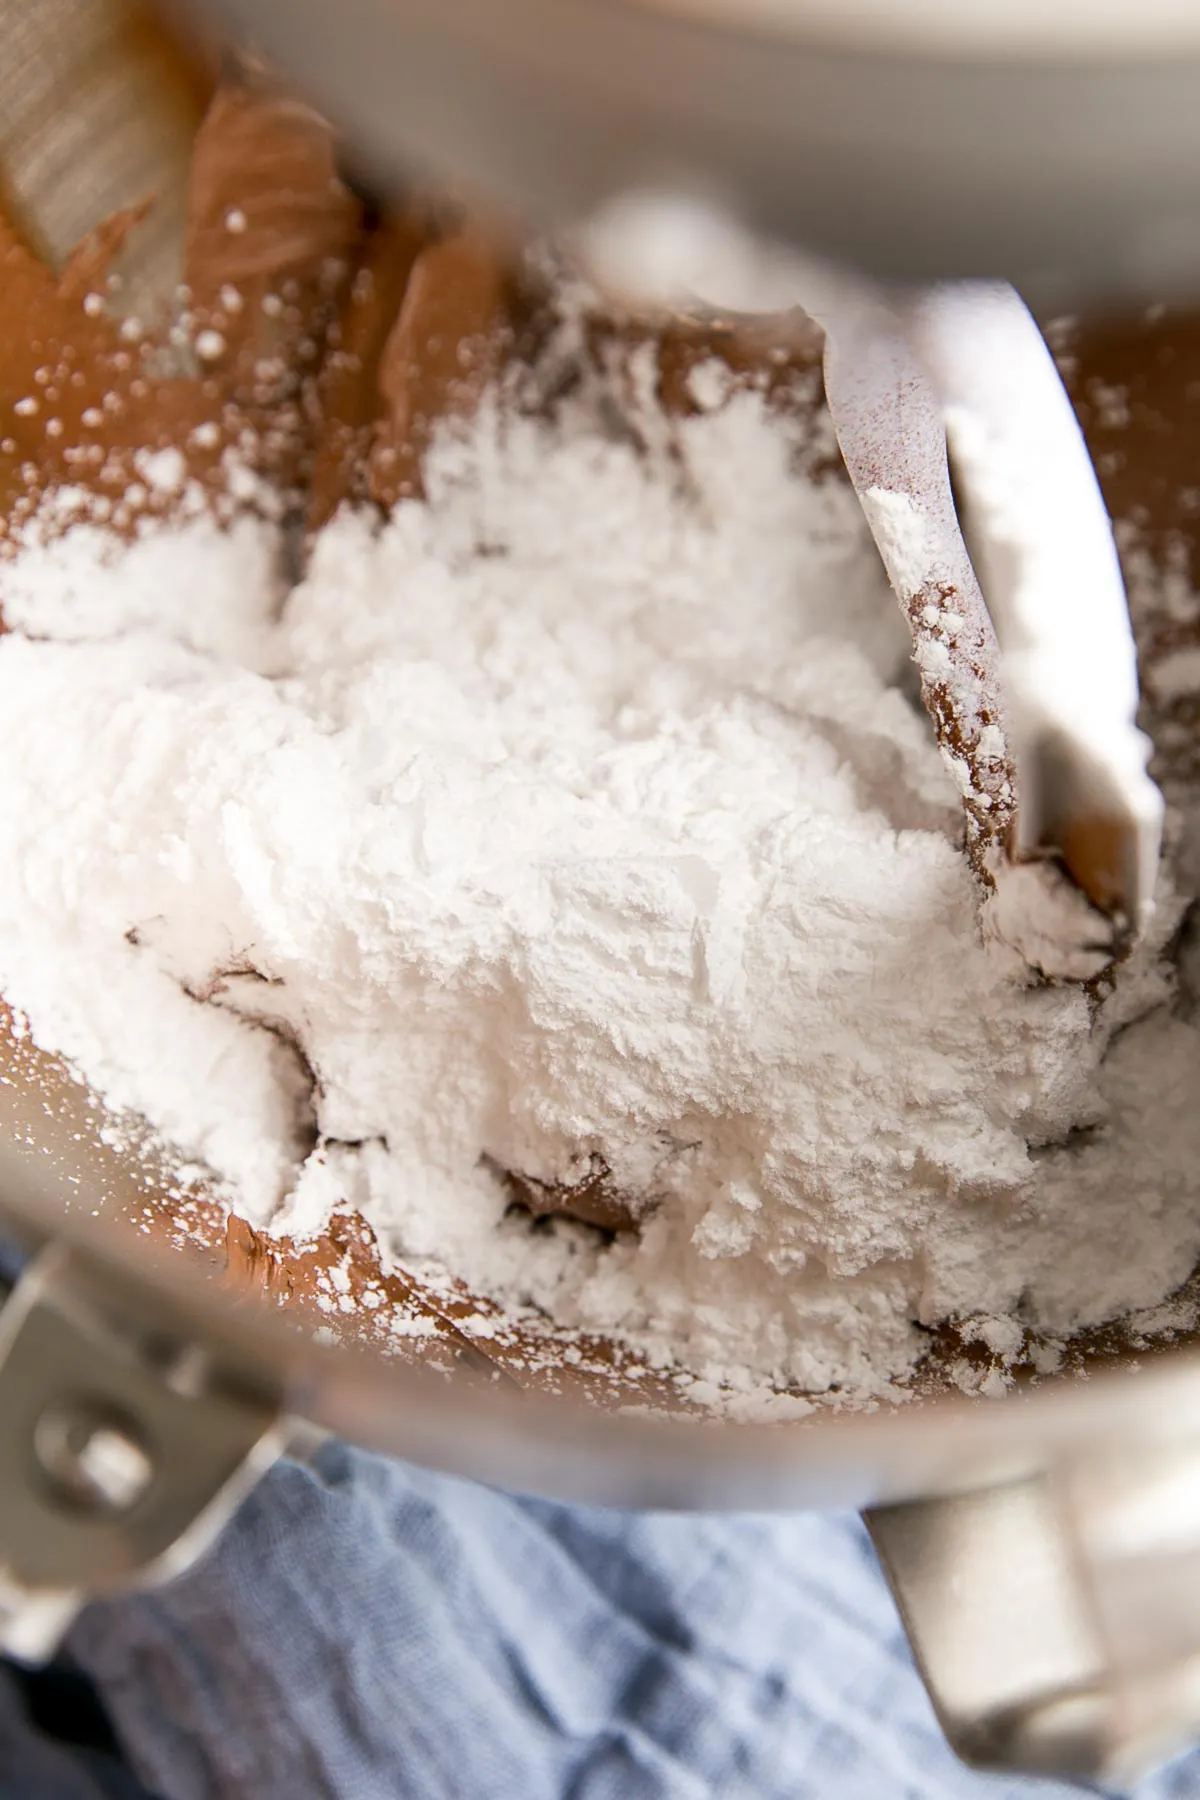 powdered sugar added 1 cup at a time.